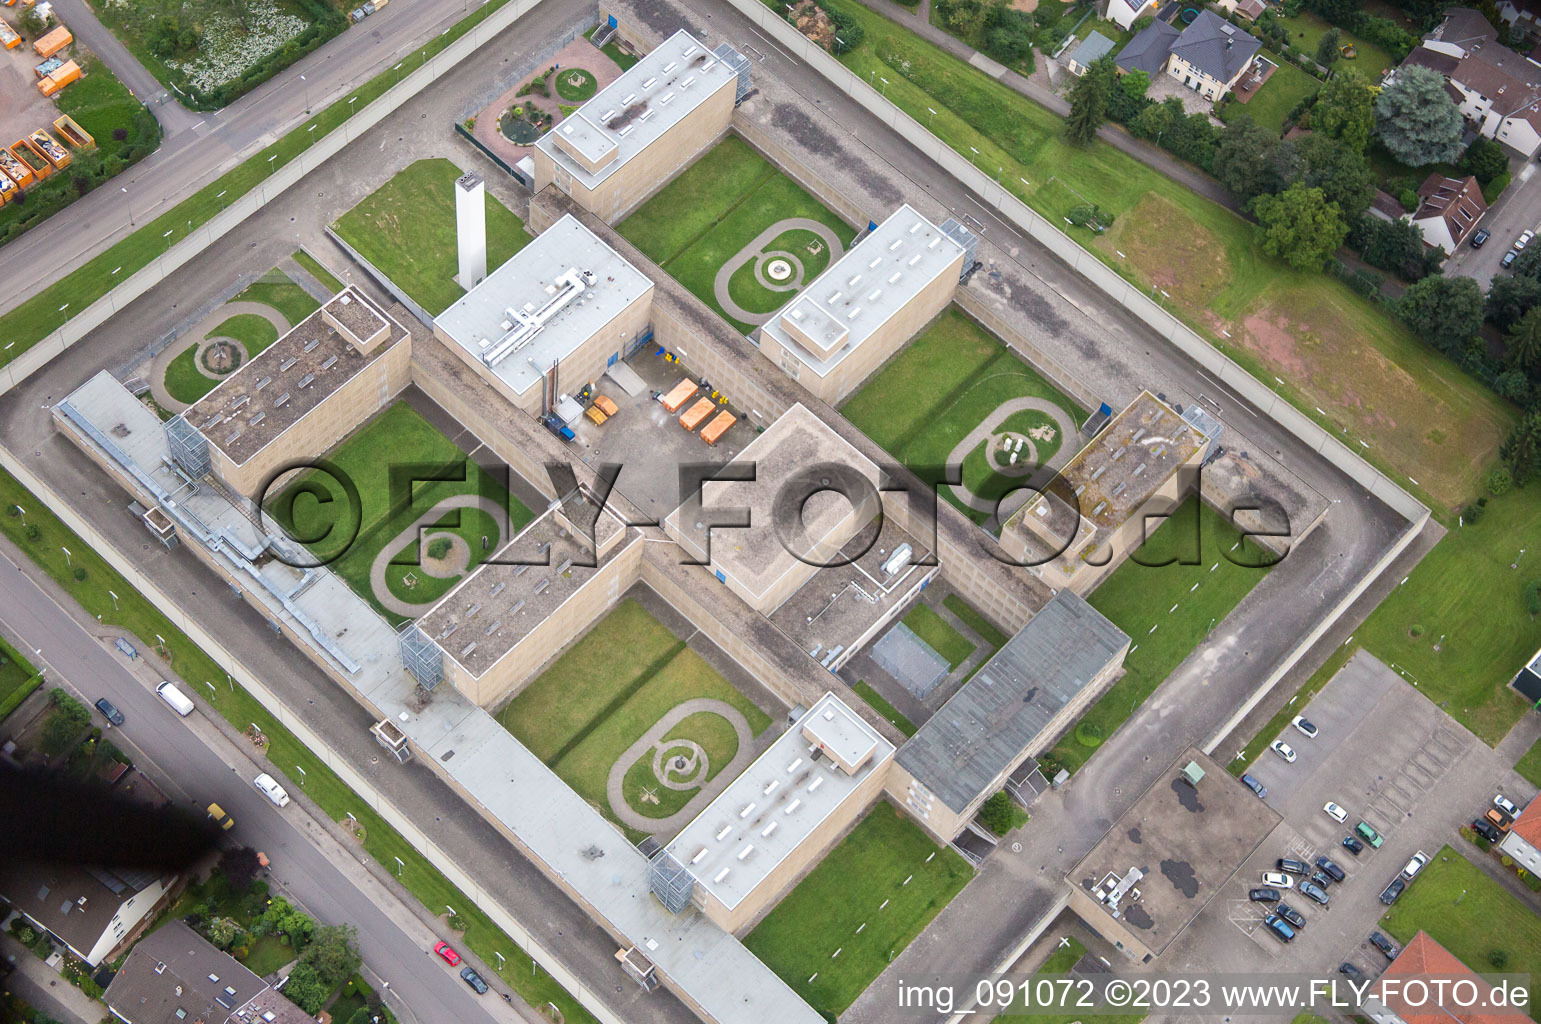 Aerial photograpy of Correctional facility in Frankenthal in the state Rhineland-Palatinate, Germany